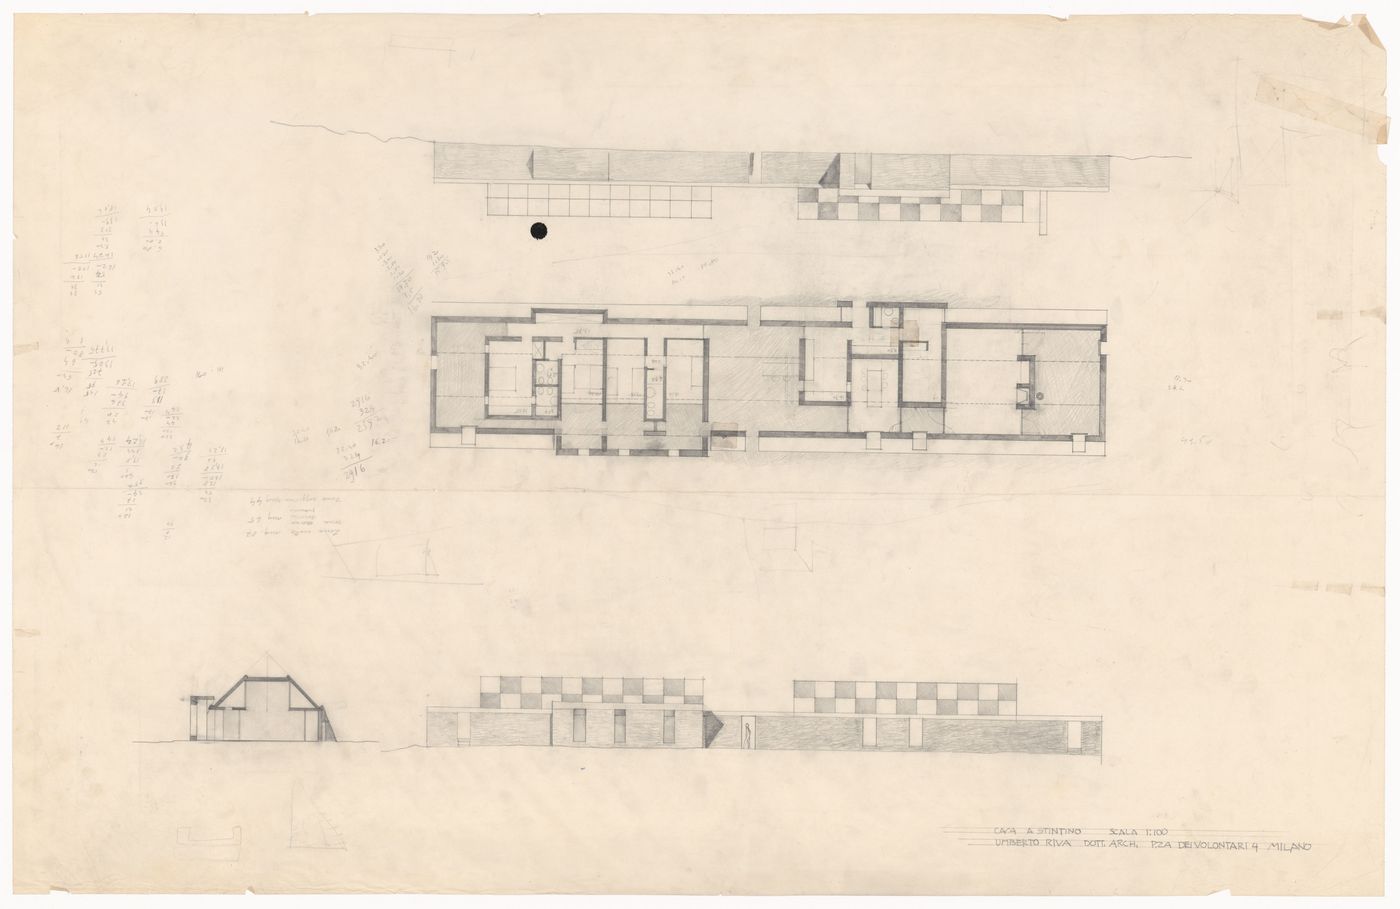 Sections, elevations and floor plans for Case Zazzu, Stintino, Italy